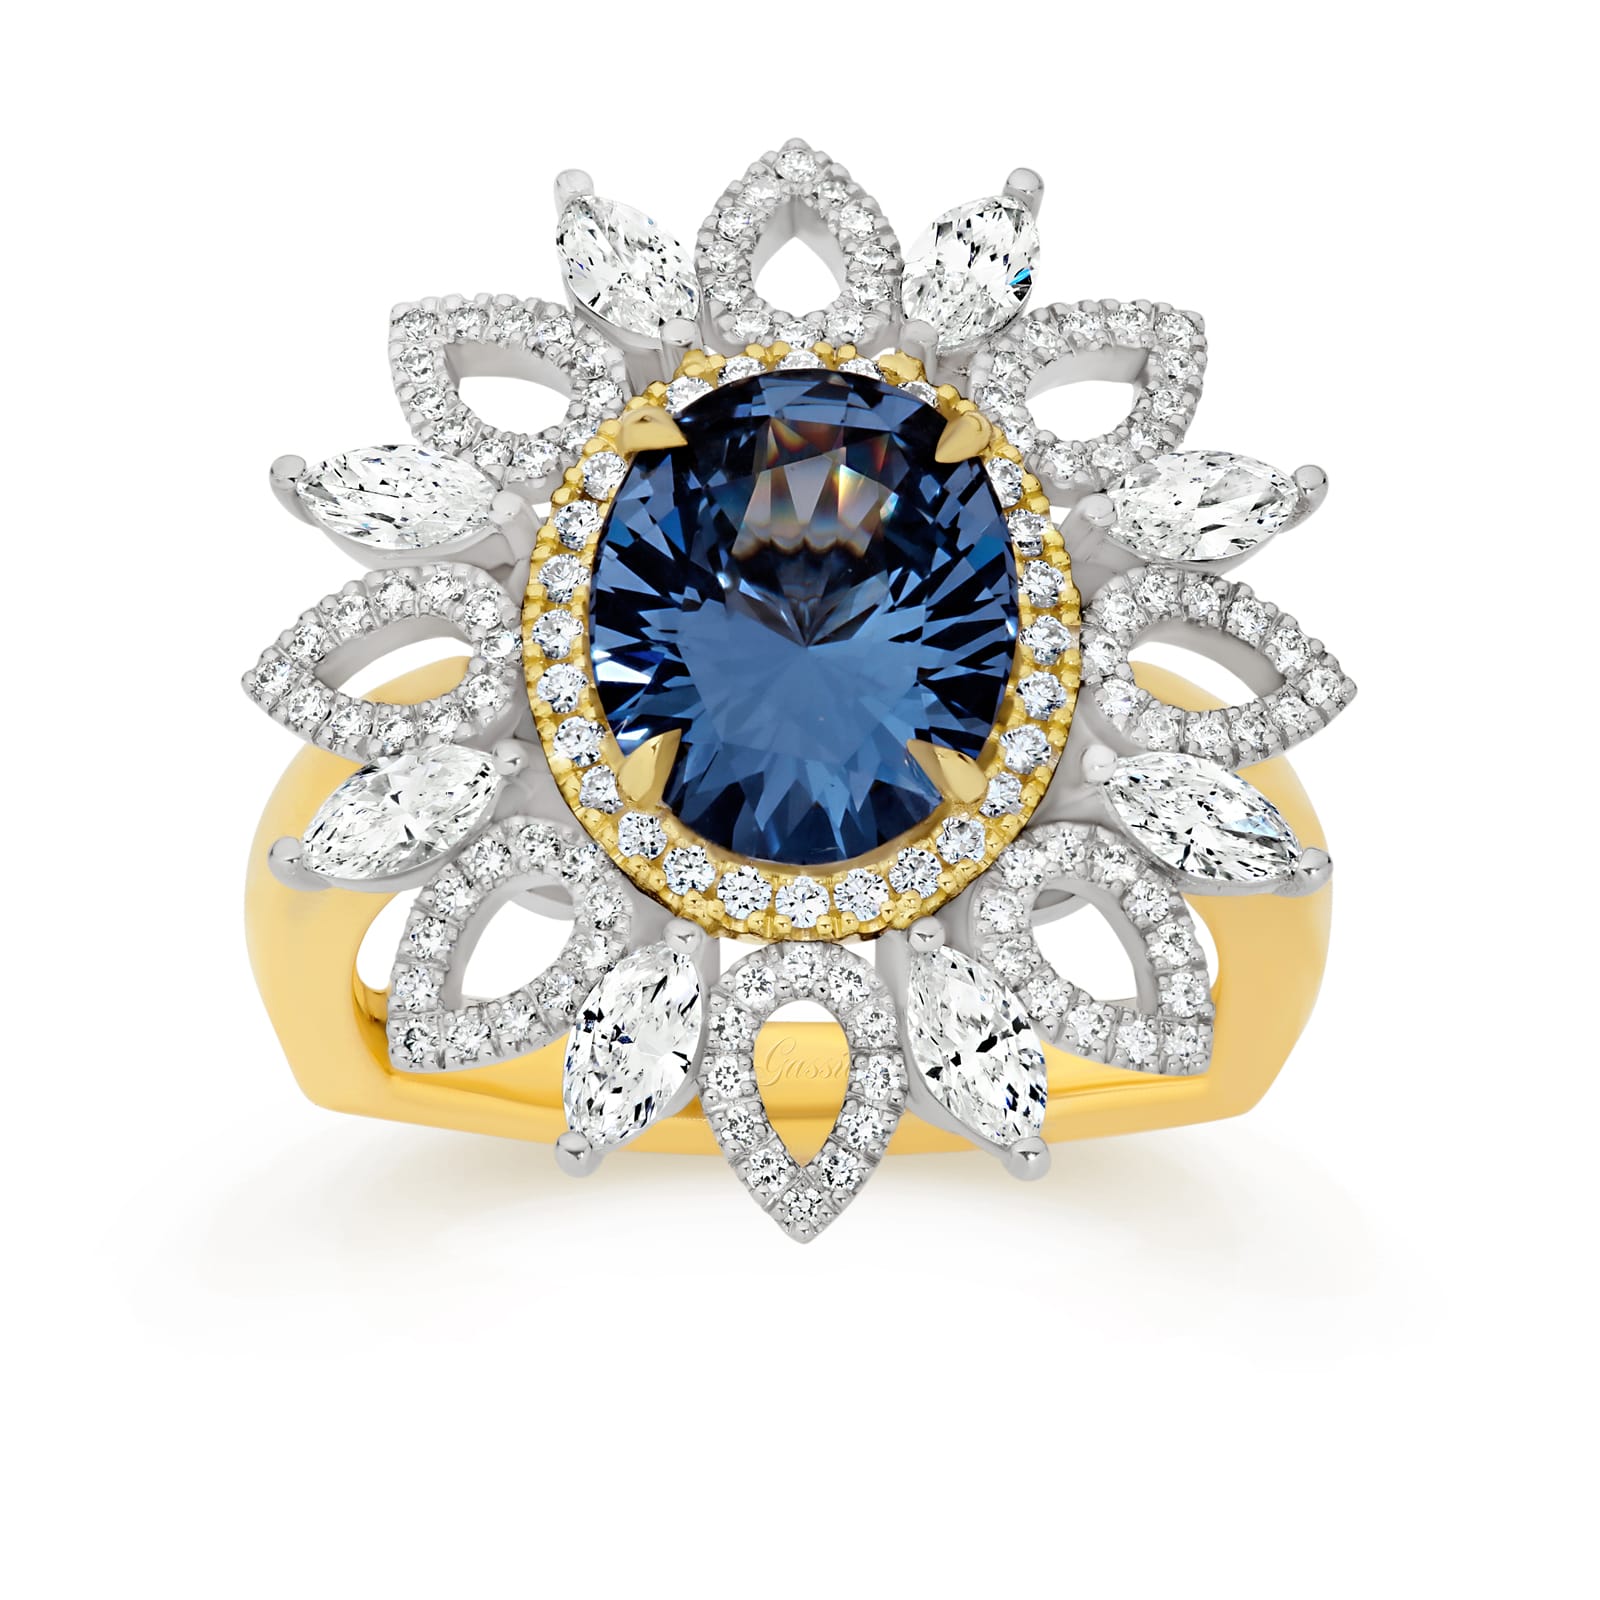 Aurora is a handcrafted 3.87ct Spinel and diamond ring from LeGassick Diamonds & Jewellery Gold Coast.